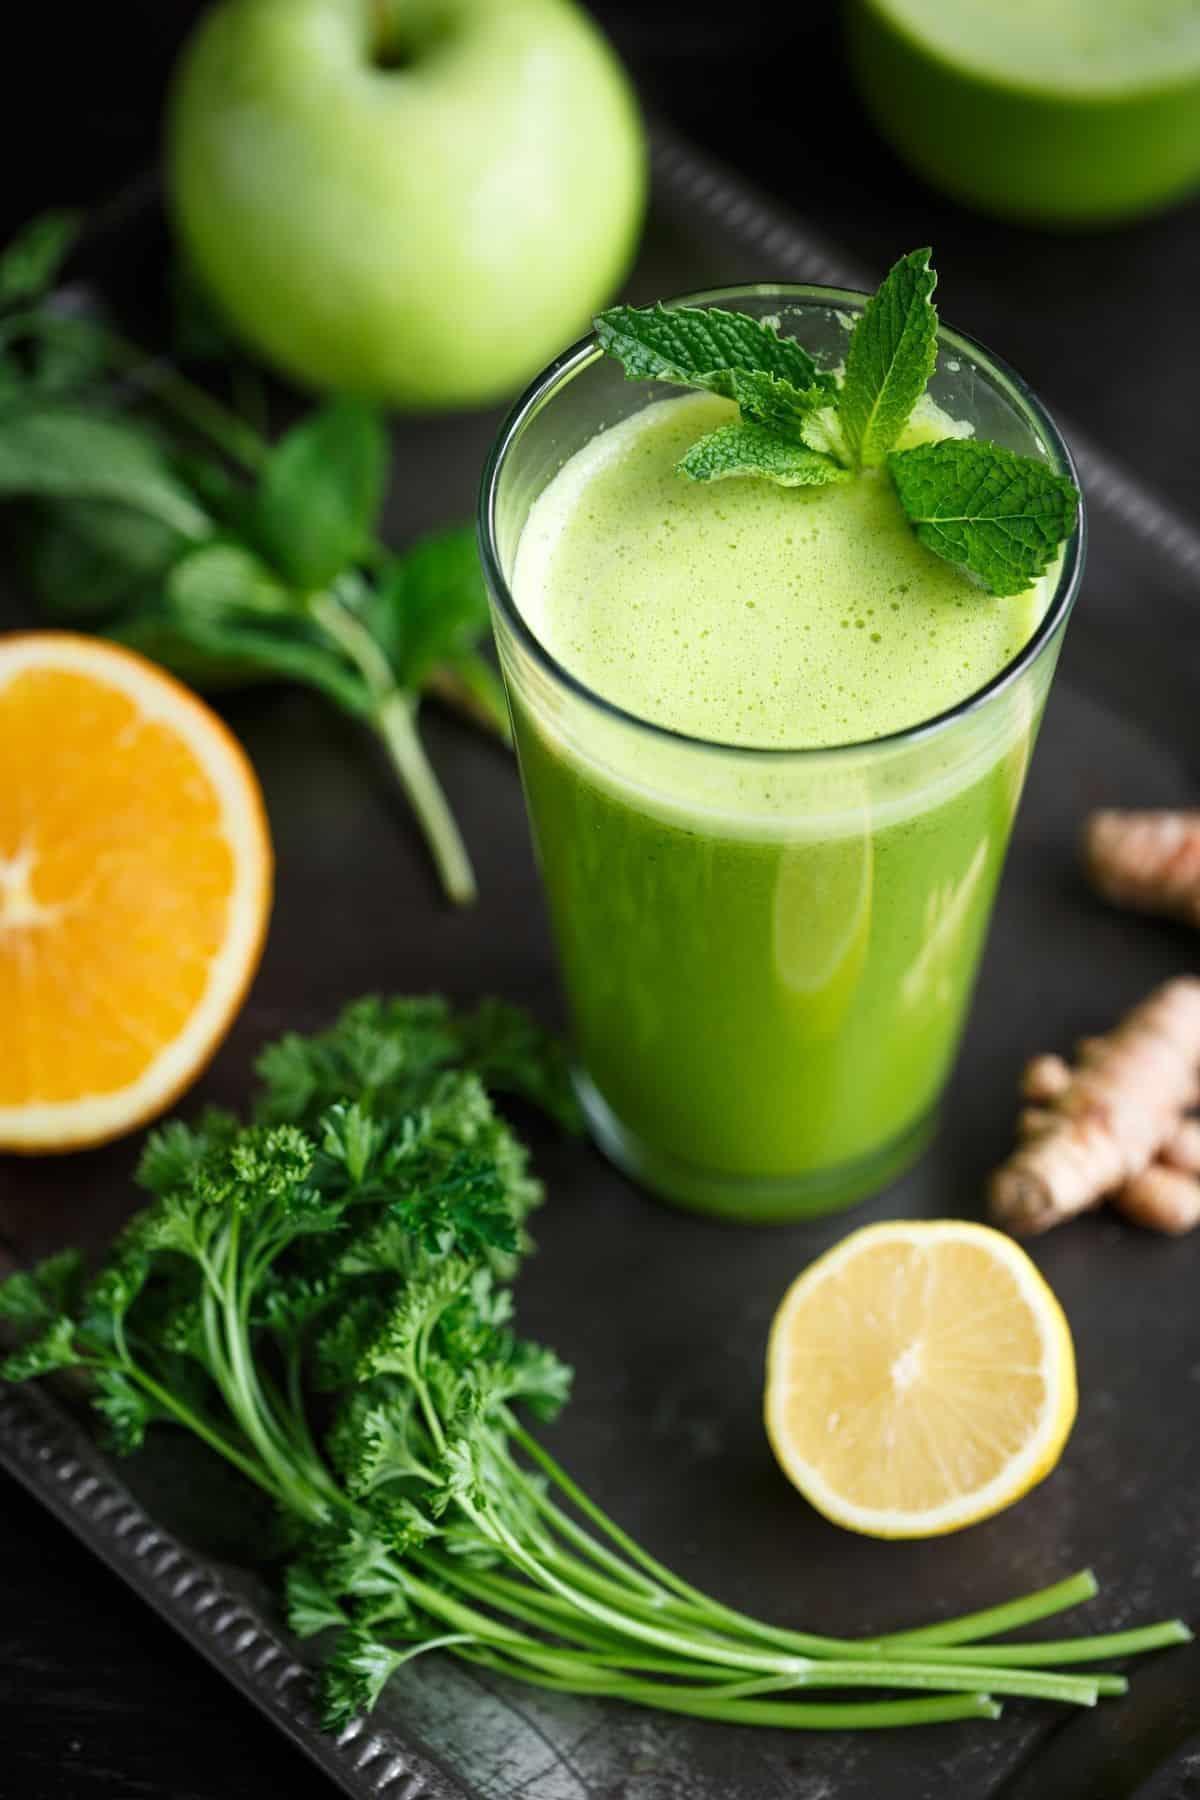 https://www.cleaneatingkitchen.com/wp-content/uploads/2021/01/green-juice-served-with-mint-parsley-lemon-and-apple.jpg